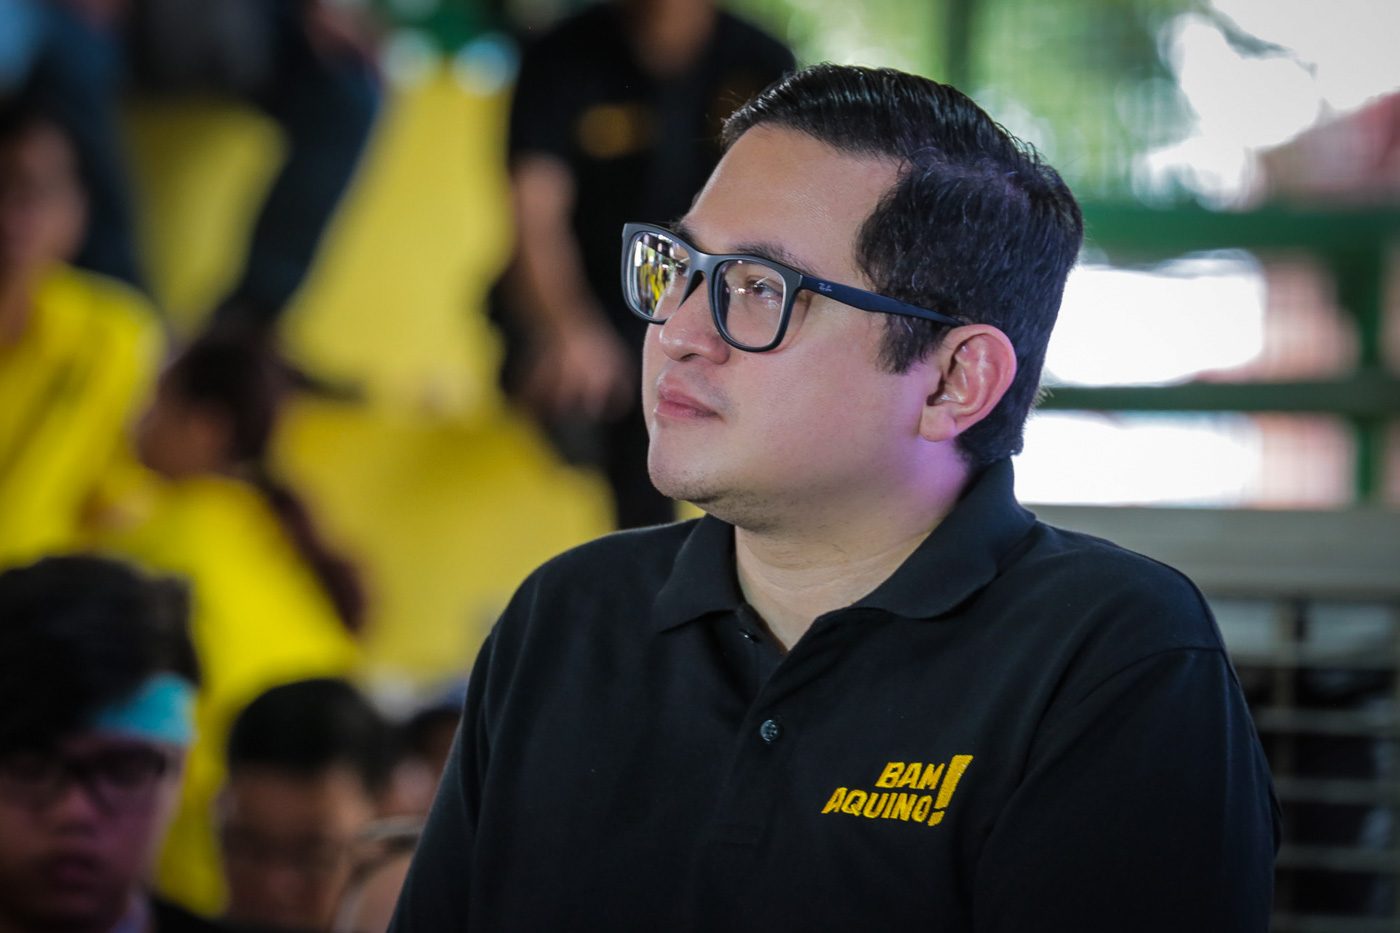 Bam Aquino’s reelection loss: A case of miscalculation?